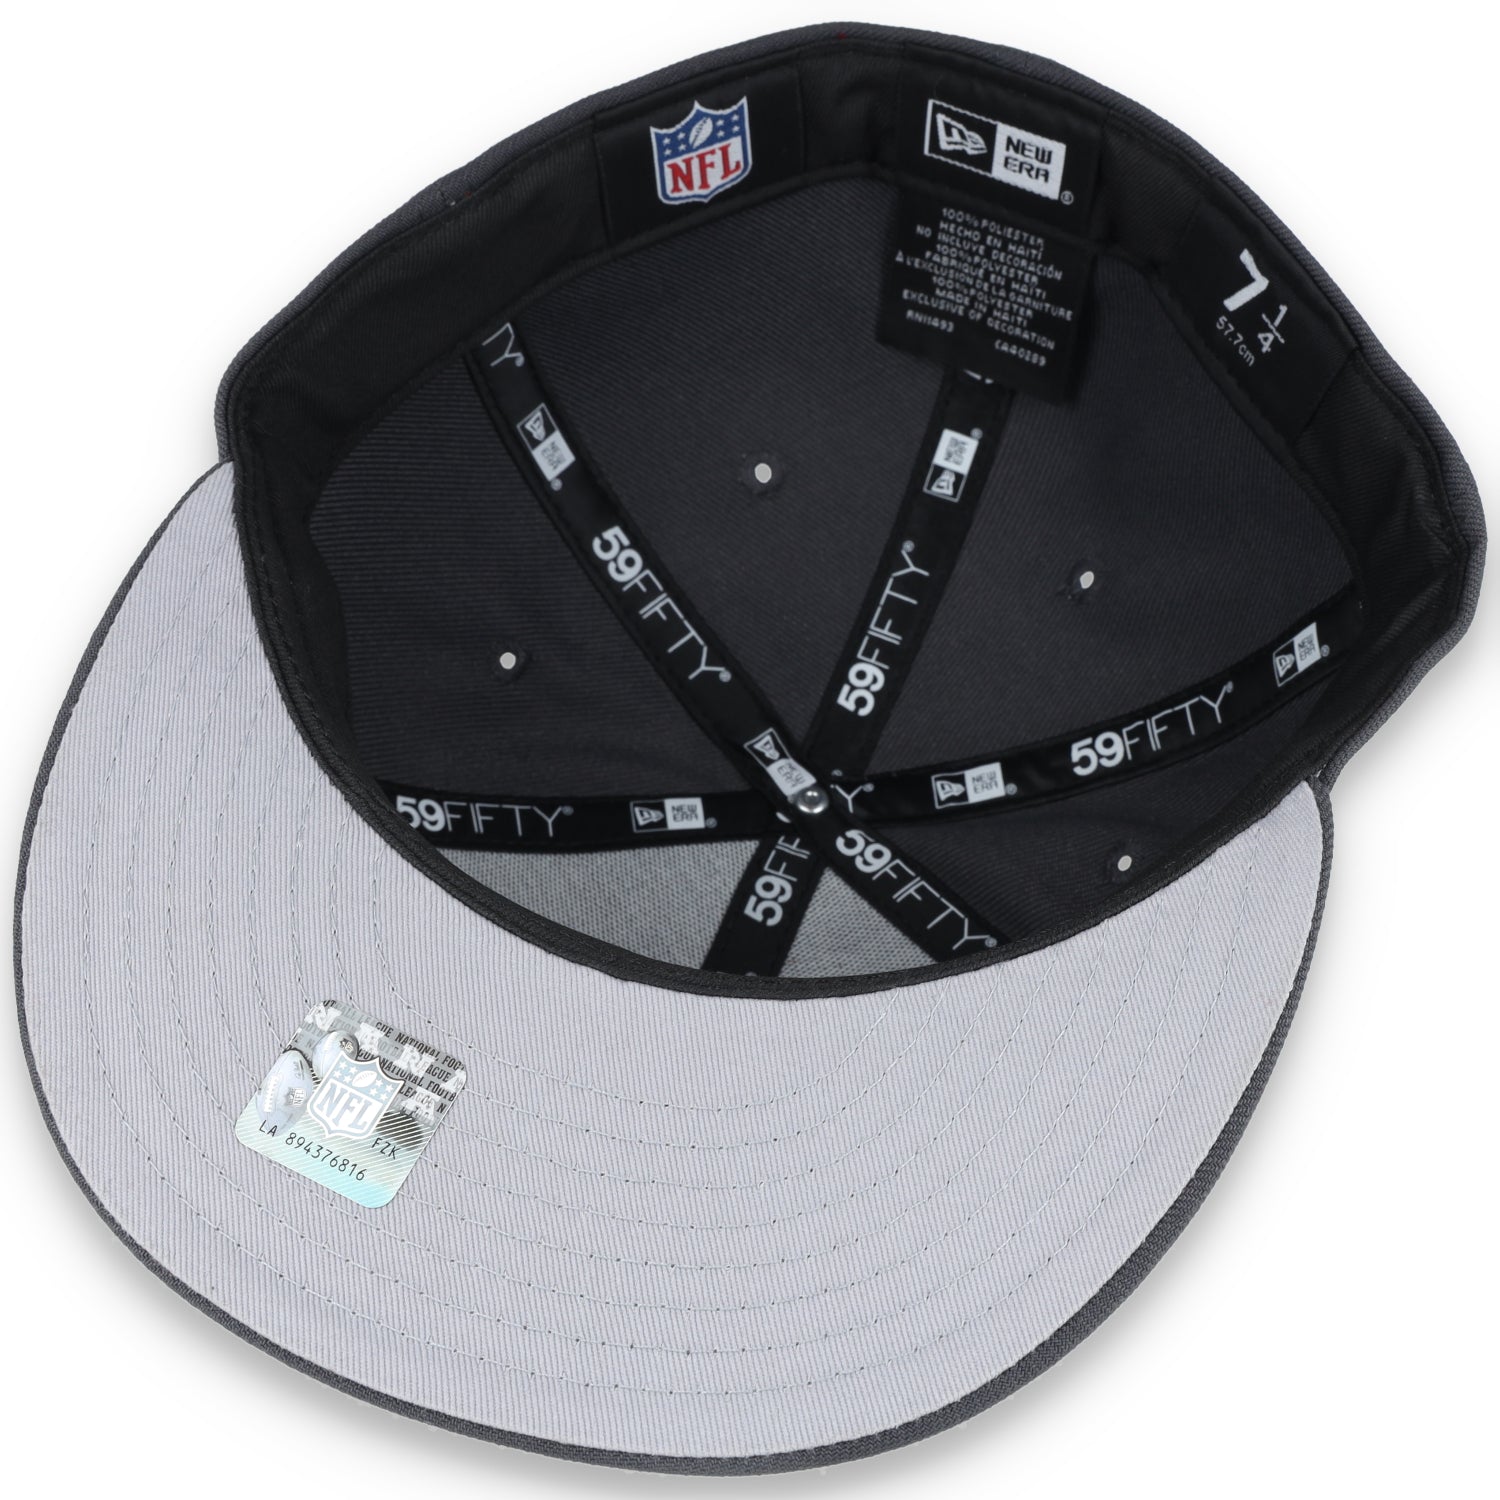 NEW ERA SAN FRANCISCO 49ERS 1990 PRO BOWL SIDE PATCH SCRIPT 59FIFTY FITTED HAT-GREY/RED